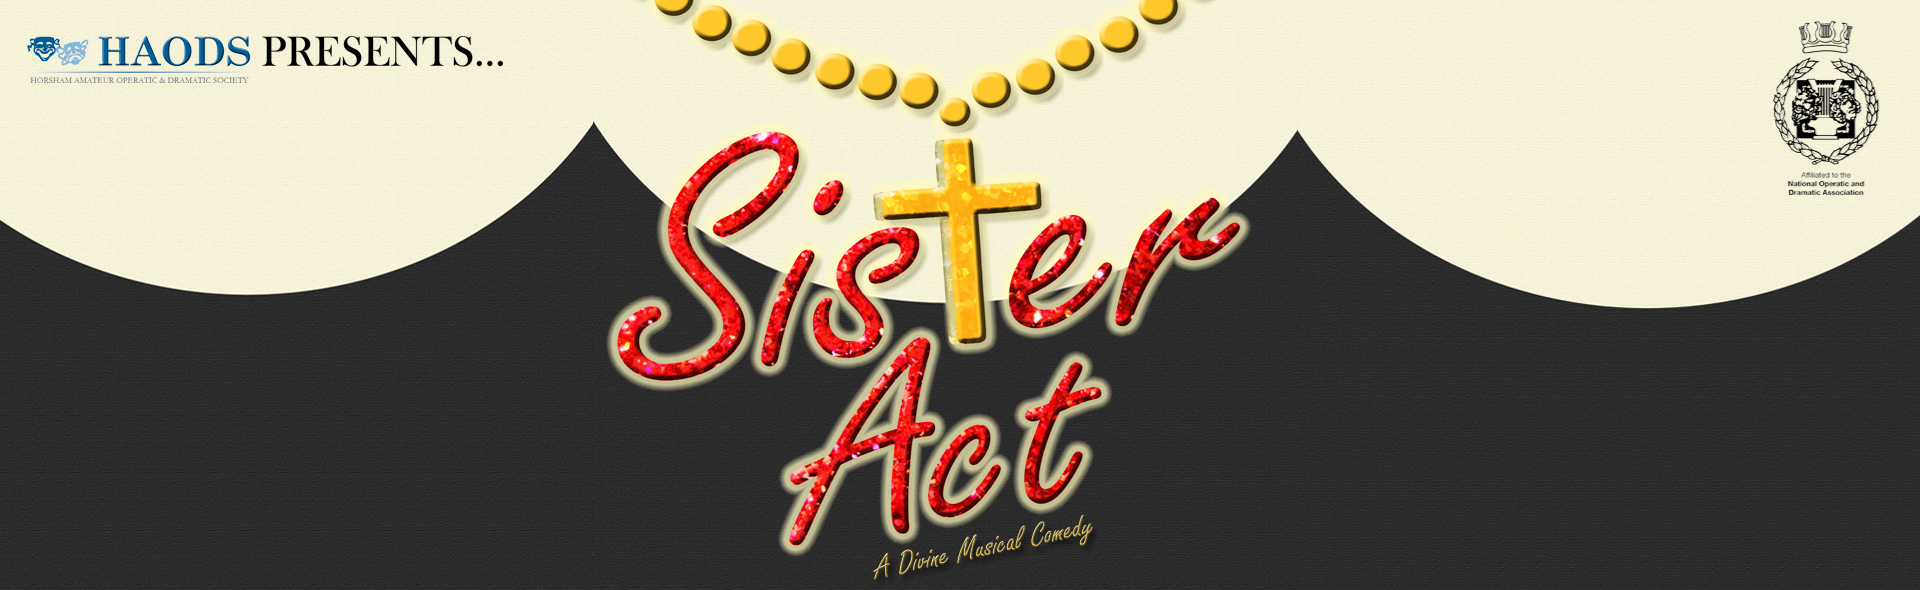 HAODS presents Sister Act